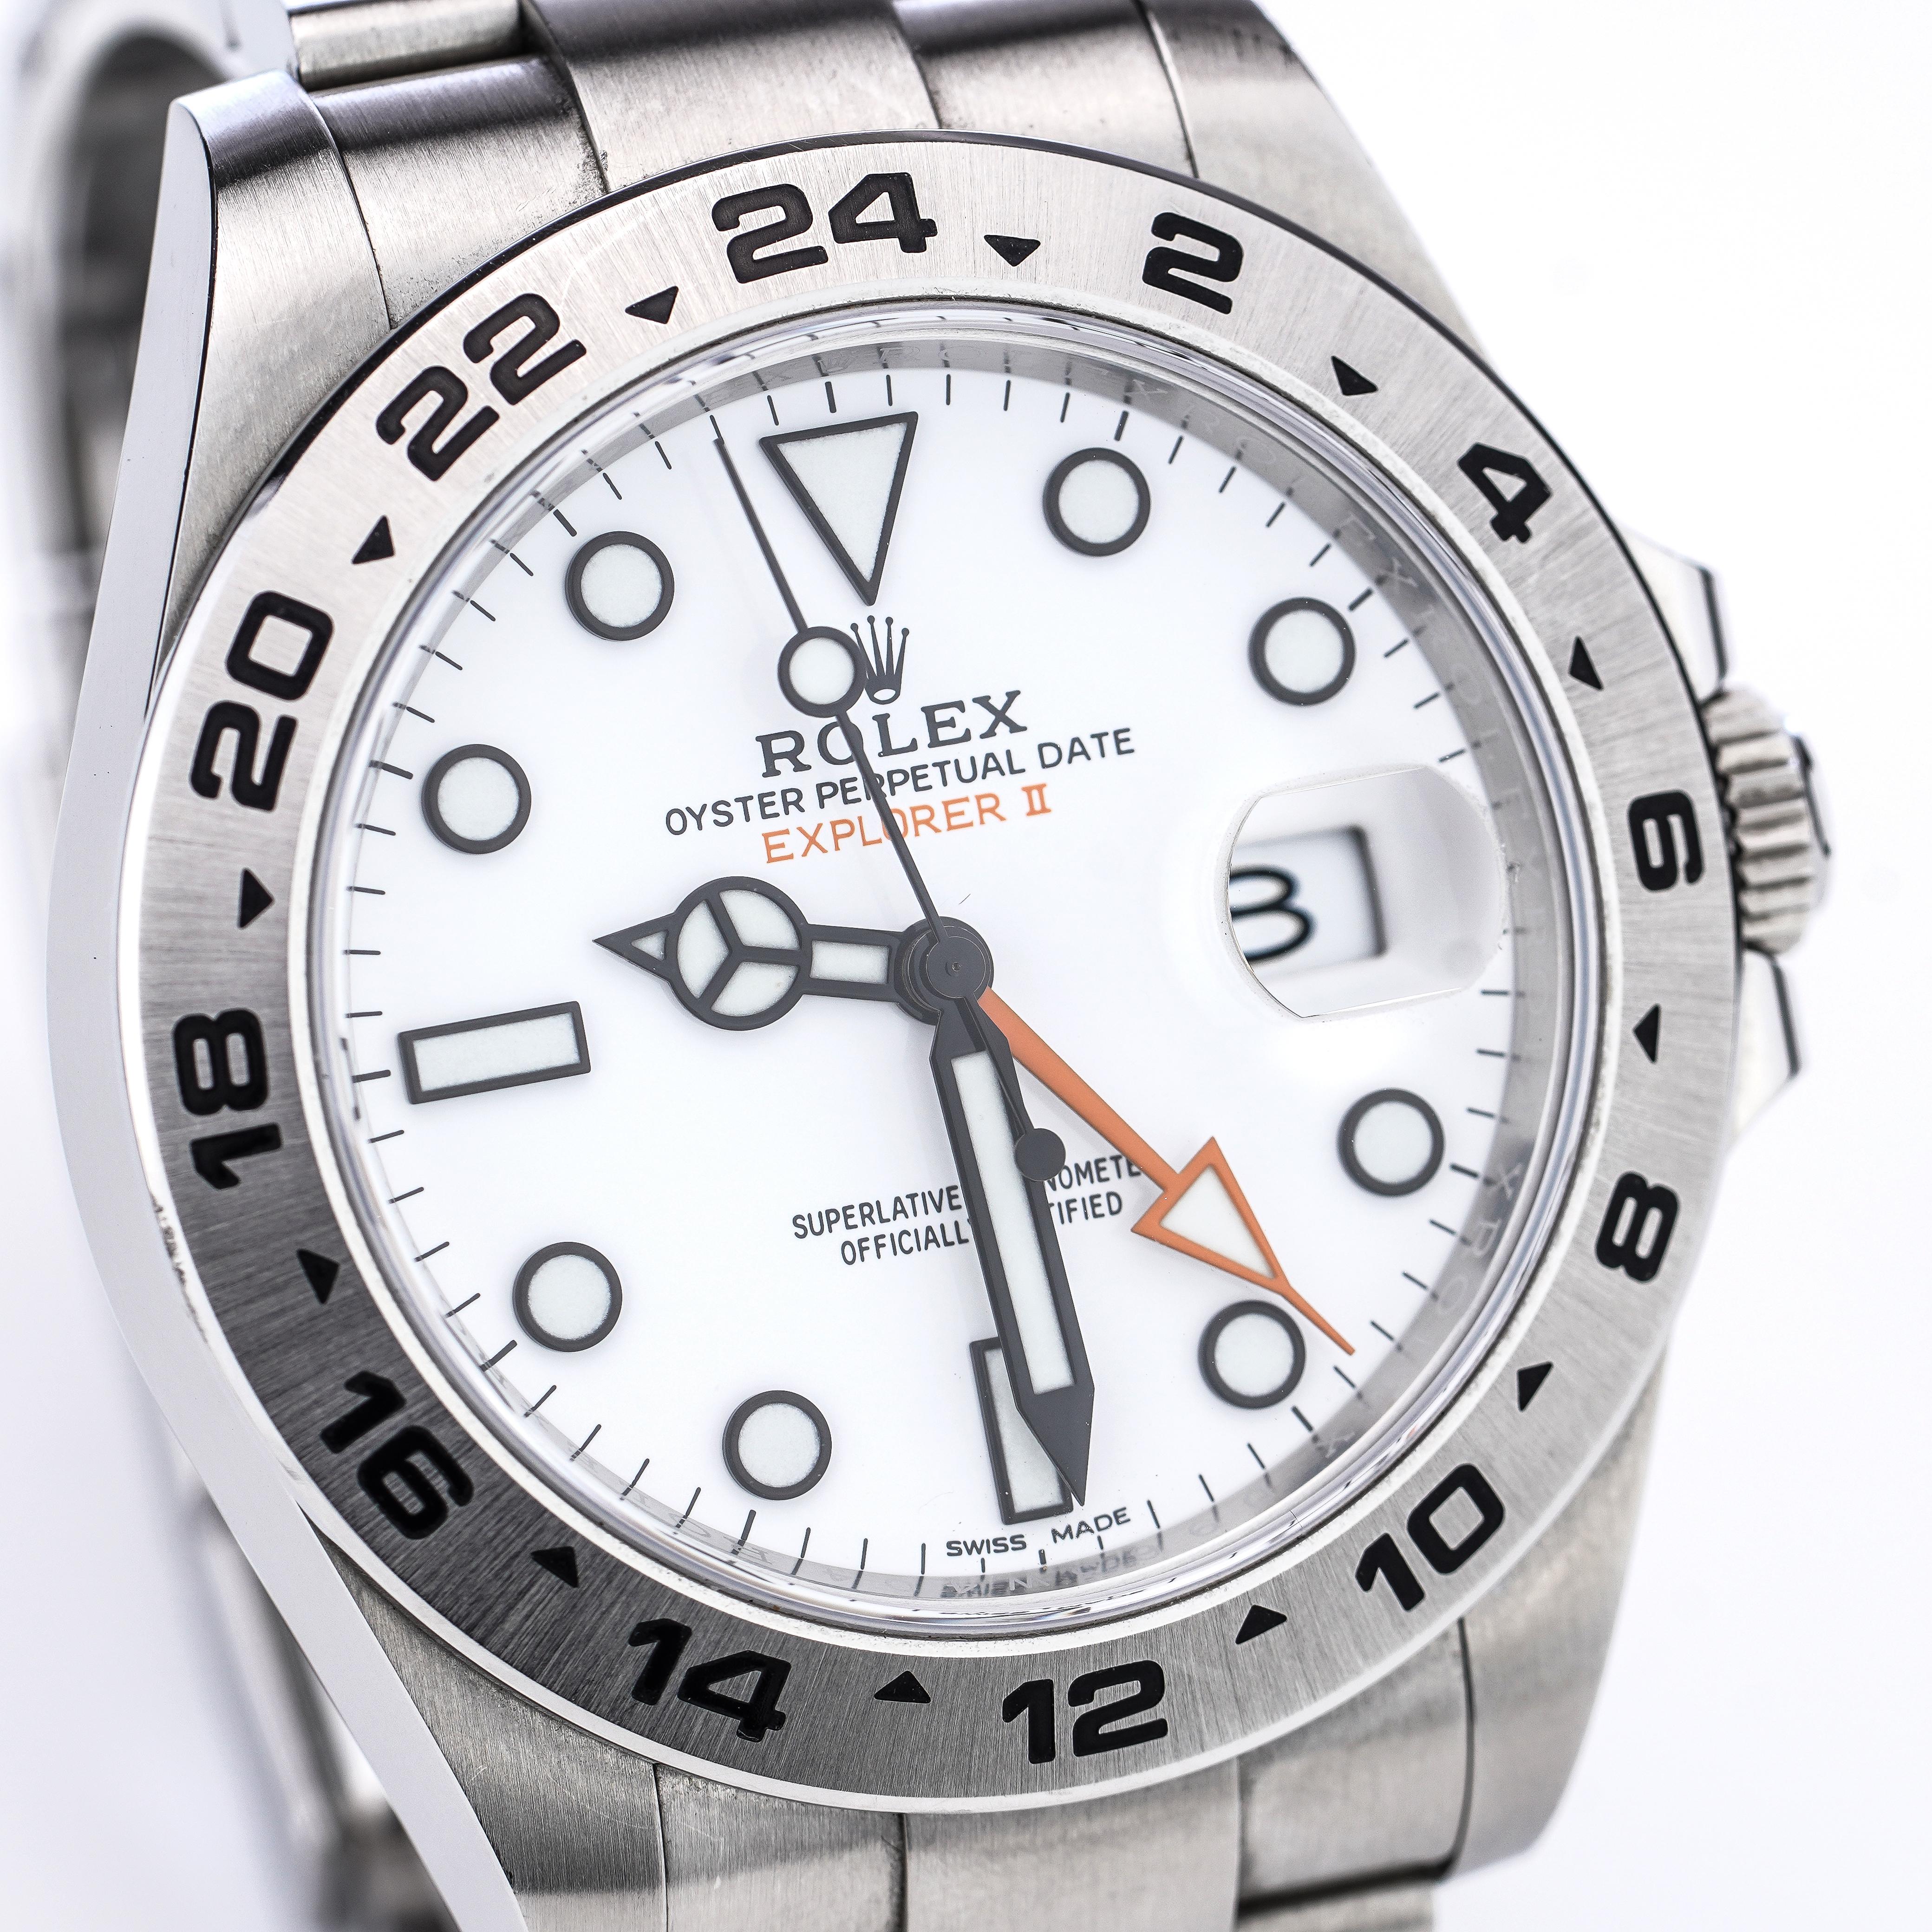 Rolex Oyster Perpetual Explorer II 216570 For Sale 3